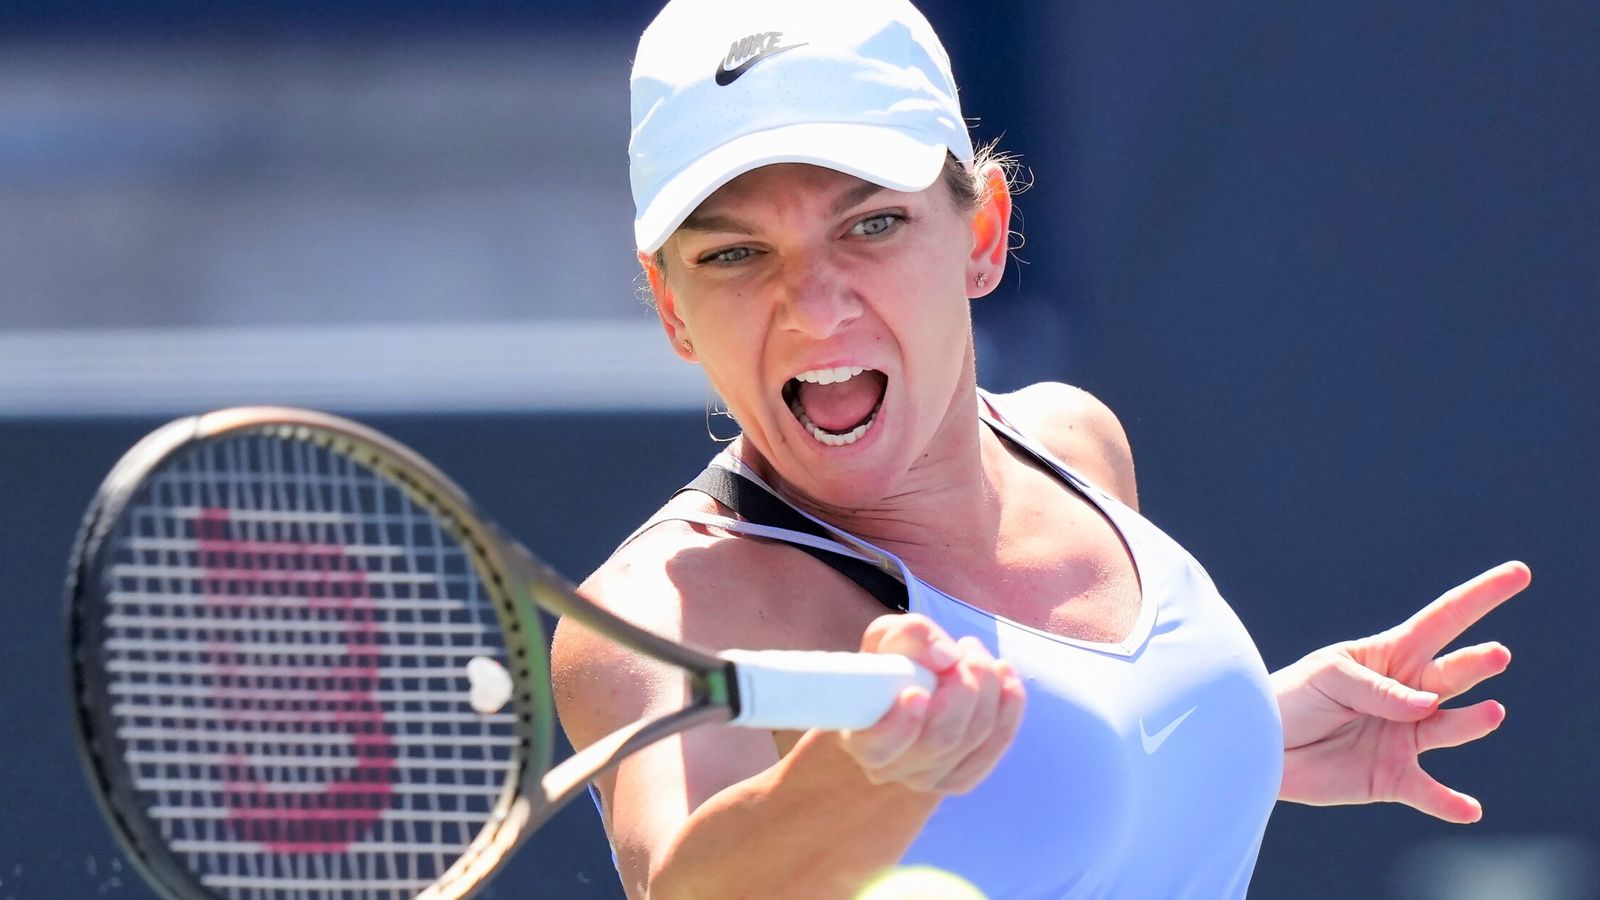 Simona Halep provisionally suspended after testing positive for banned substance